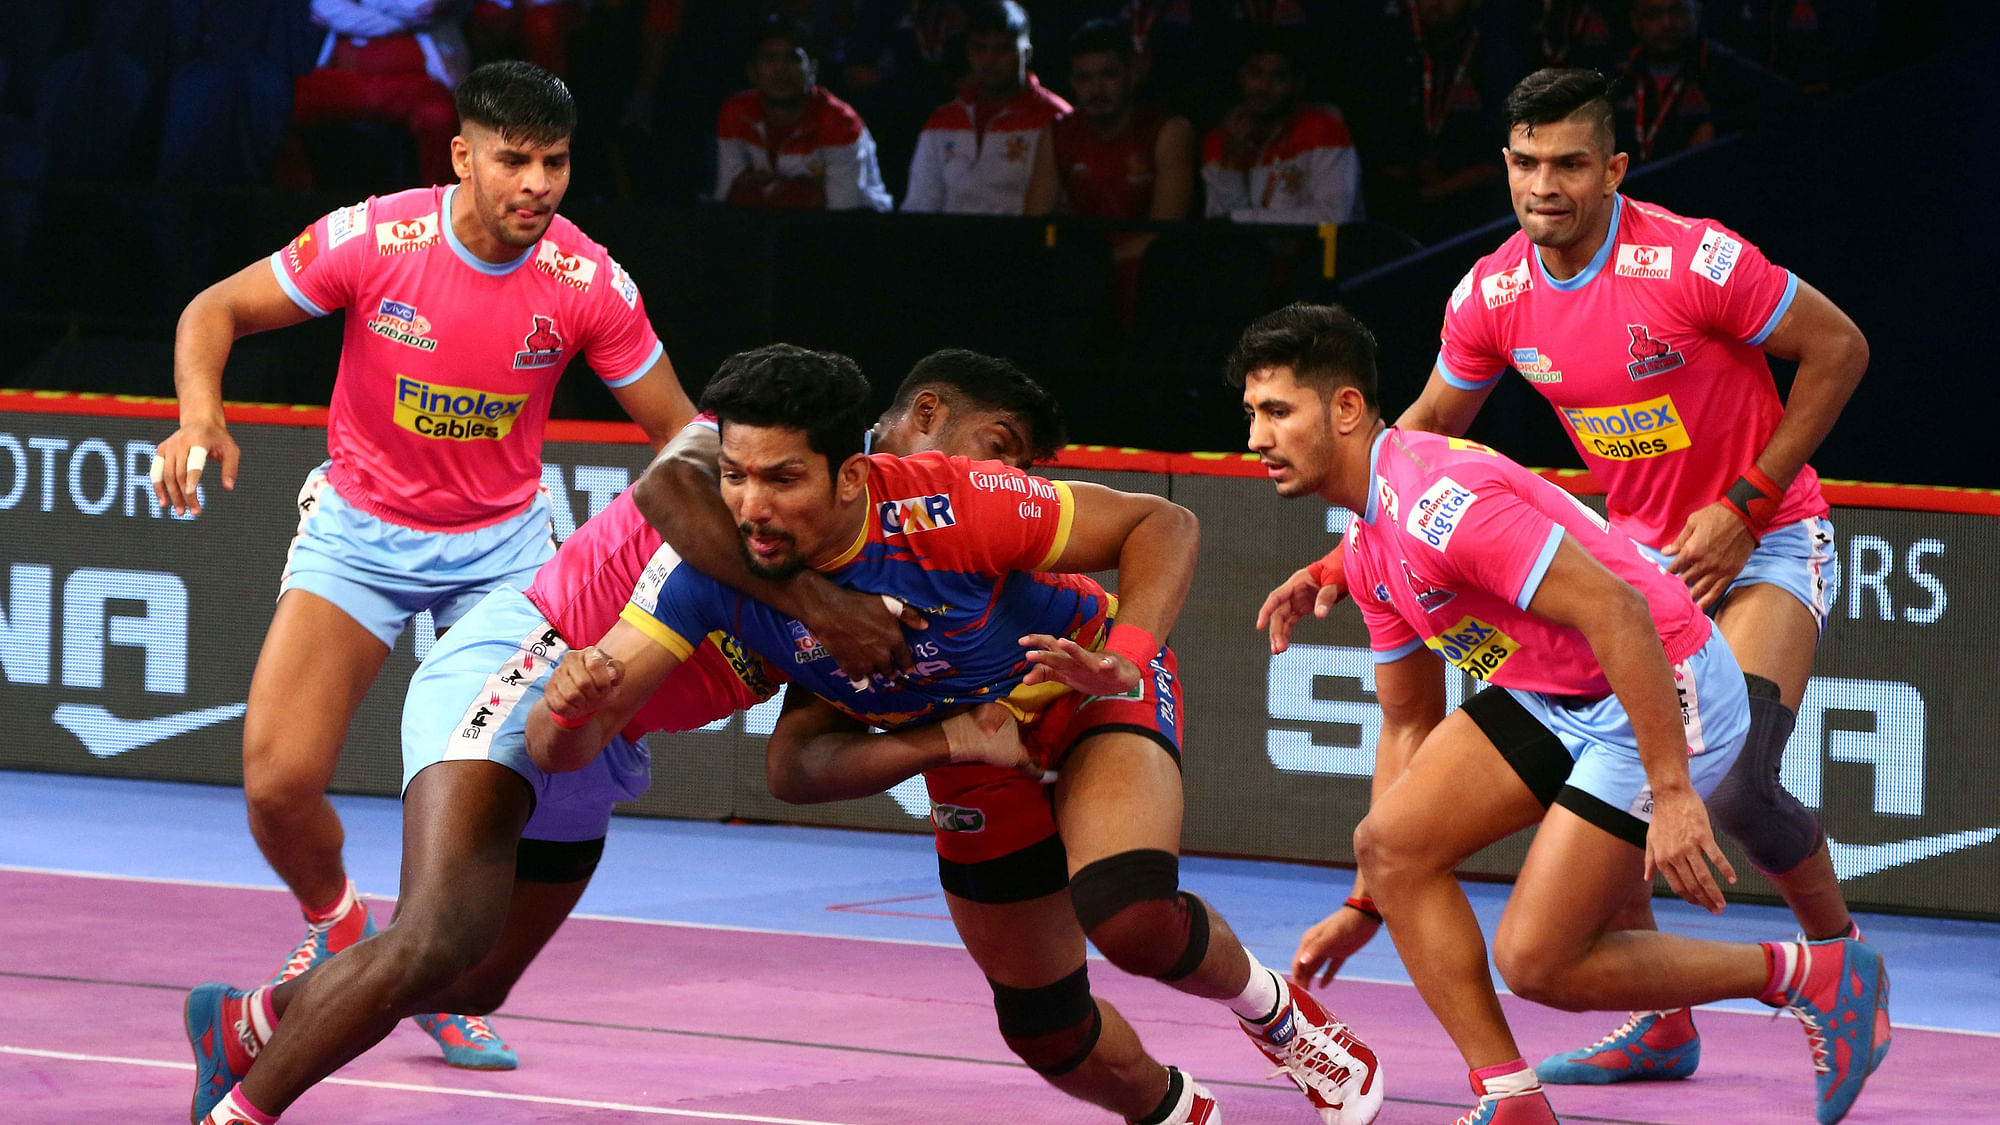 Jaipur Pink Panthers rode on a solid all-round performance to beat UP Yoddha 45-28 in the Pro Kabaddi League.